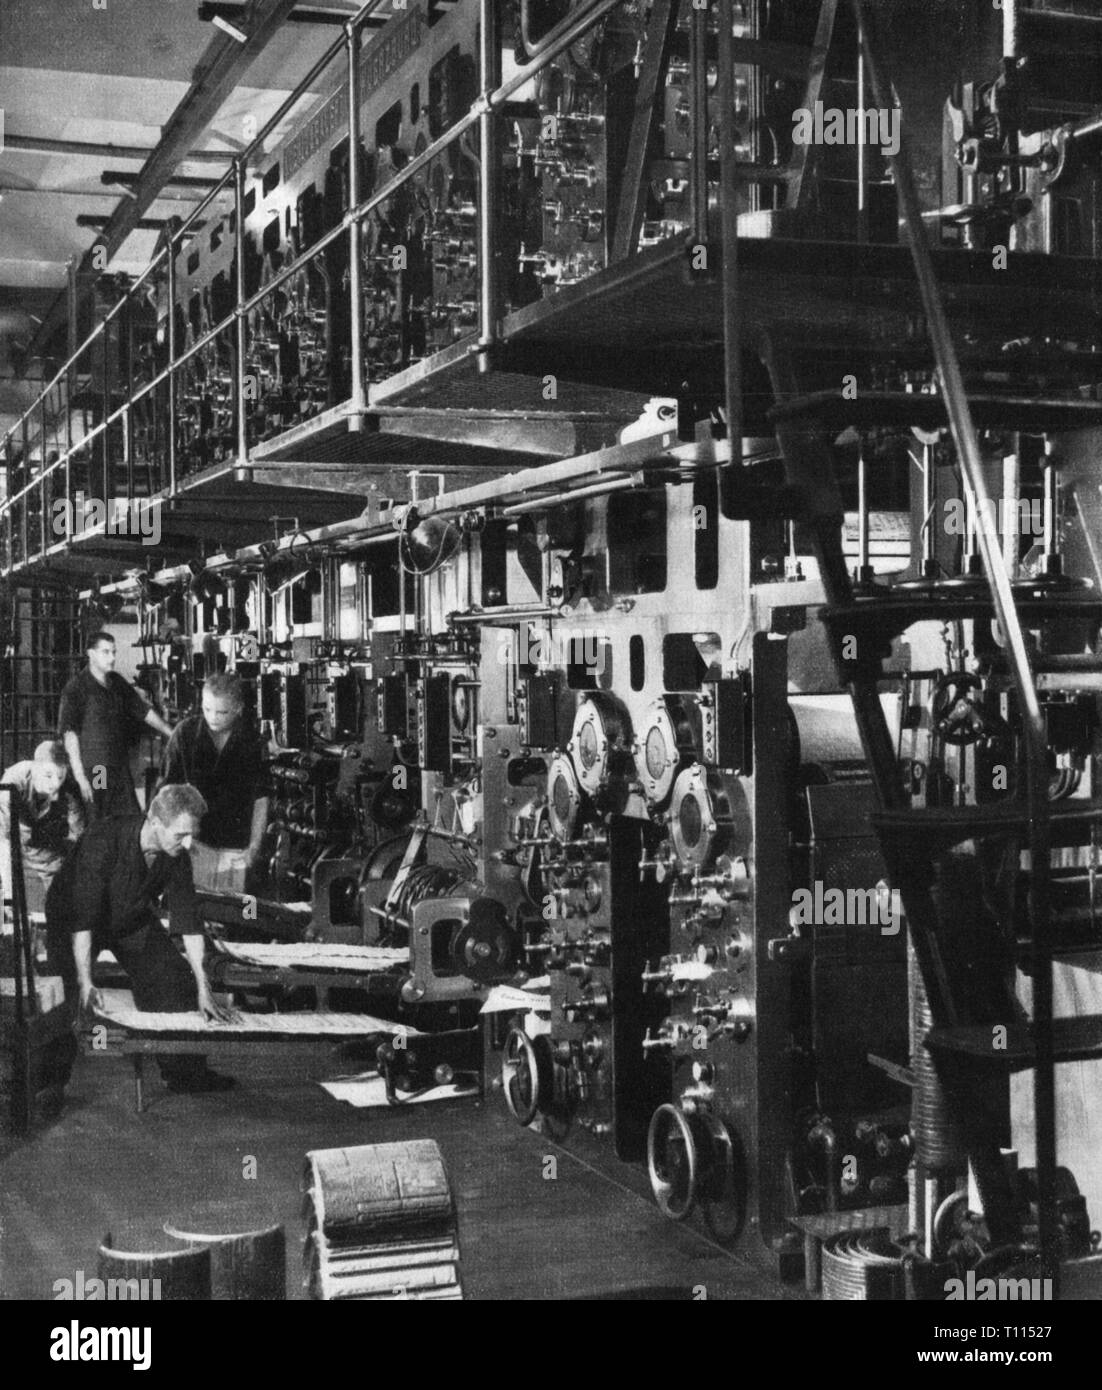 industry, print, rotary printing hall of the August Scherl publishing house, Berlin, 1930s, Additional-Rights-Clearance-Info-Not-Available Stock Photo